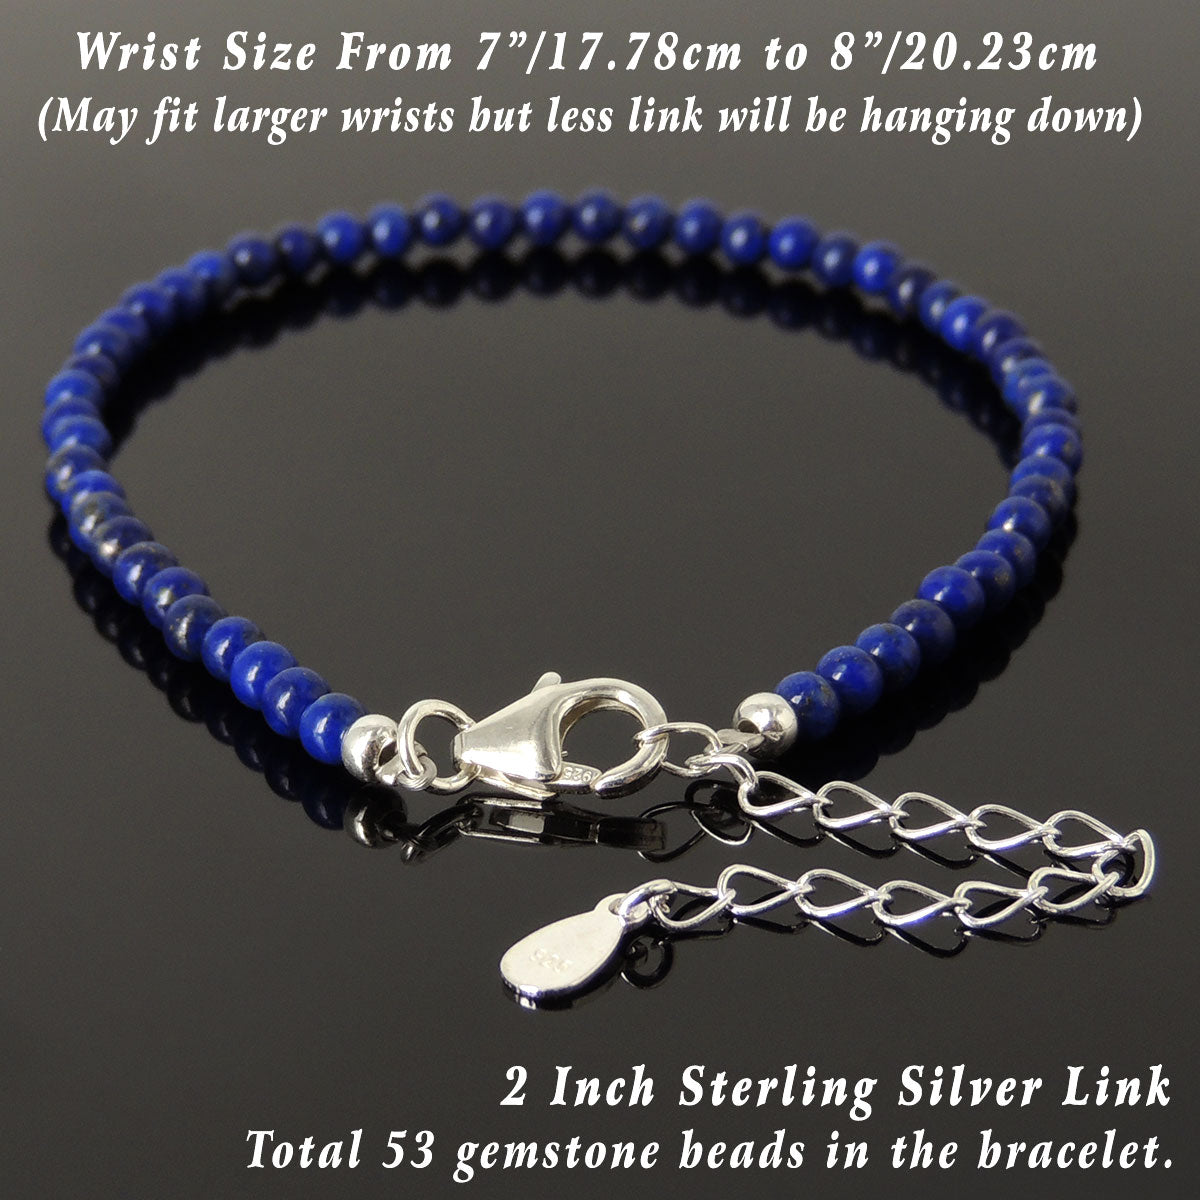 3mm Lapis Lazuli Healing Gemstone Bracelet with S925 Sterling Silver Chain & Clasp - Handmade by Gem & Silver BR1232